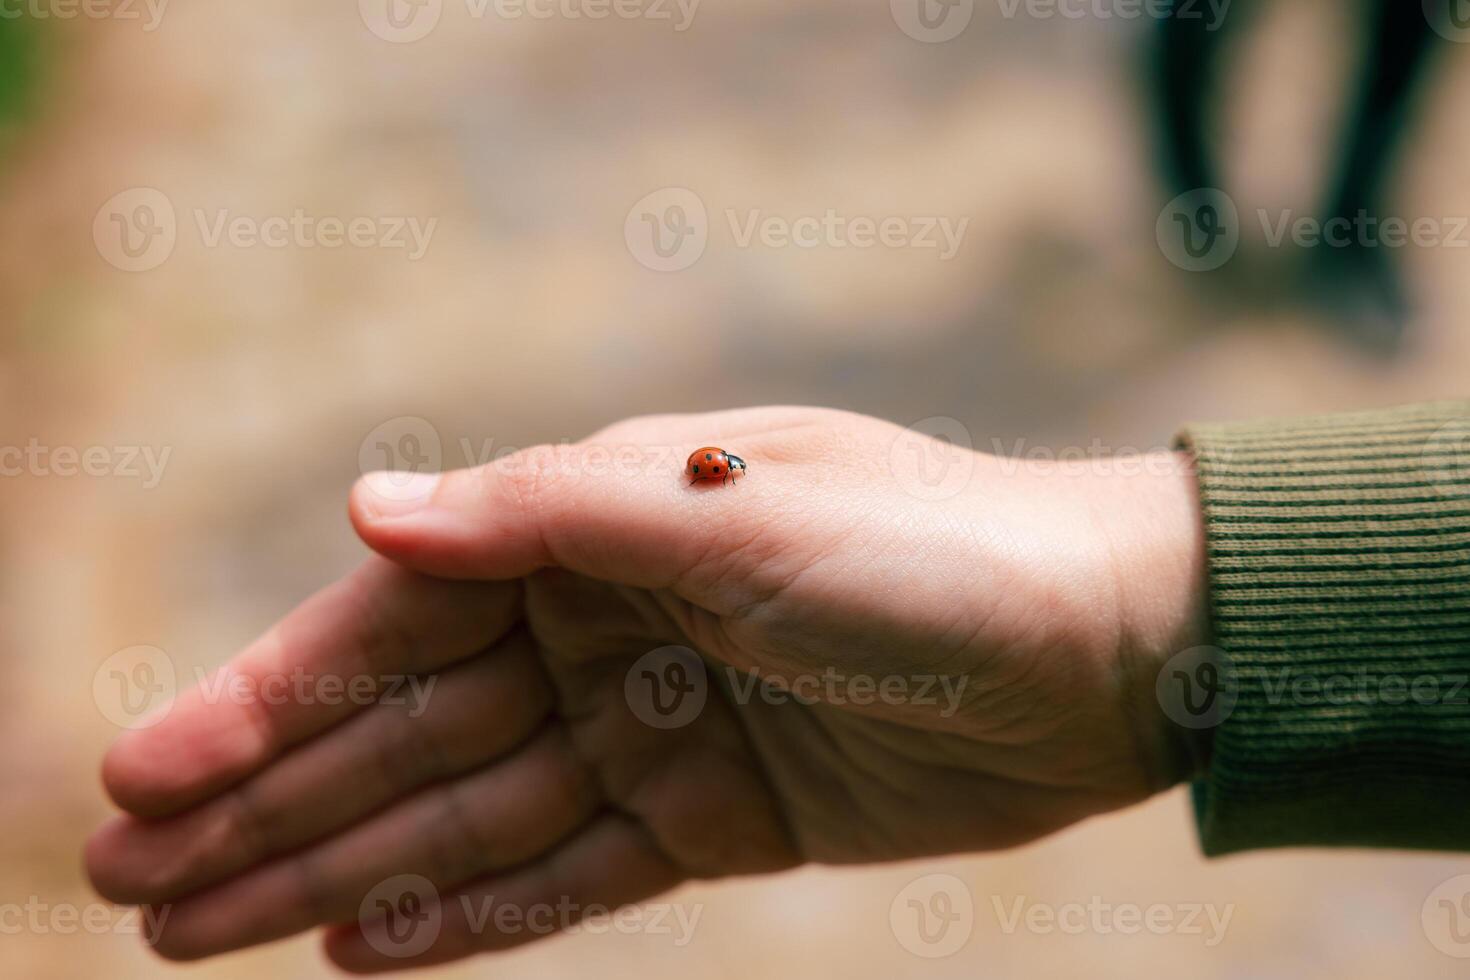 Wishing luck or falling in love concept photo. A ladybug on the woman's hand photo